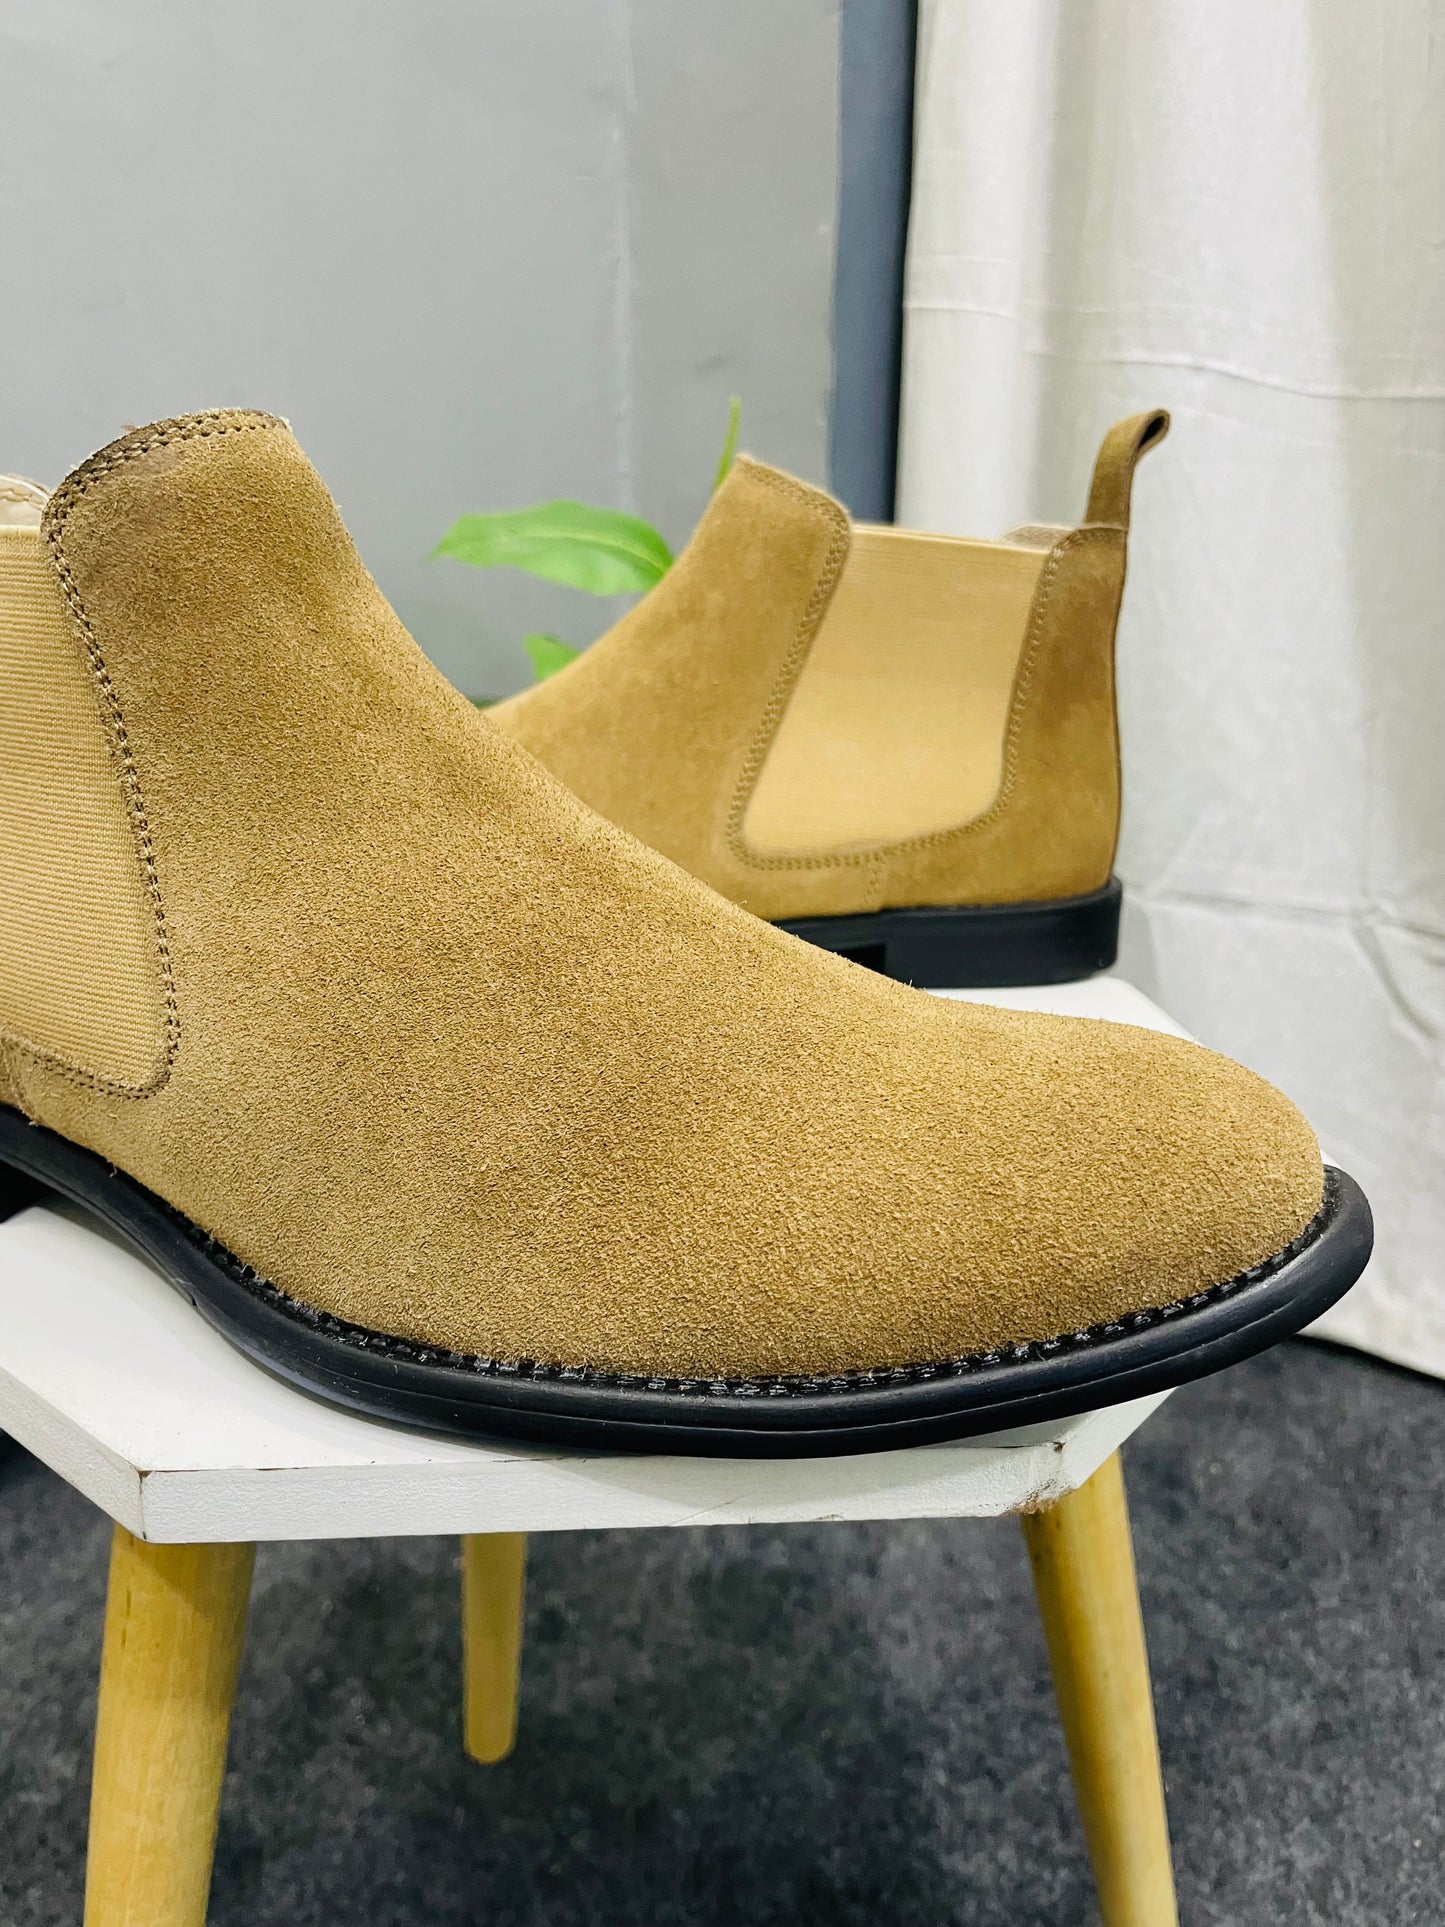 Men's Stylish Slip-On Suede Chelsea Ankle Boots for Casual Fall & Spring Wear - Comfortable, Durable TPR Sole, Cushioned Insole & Elastic Band